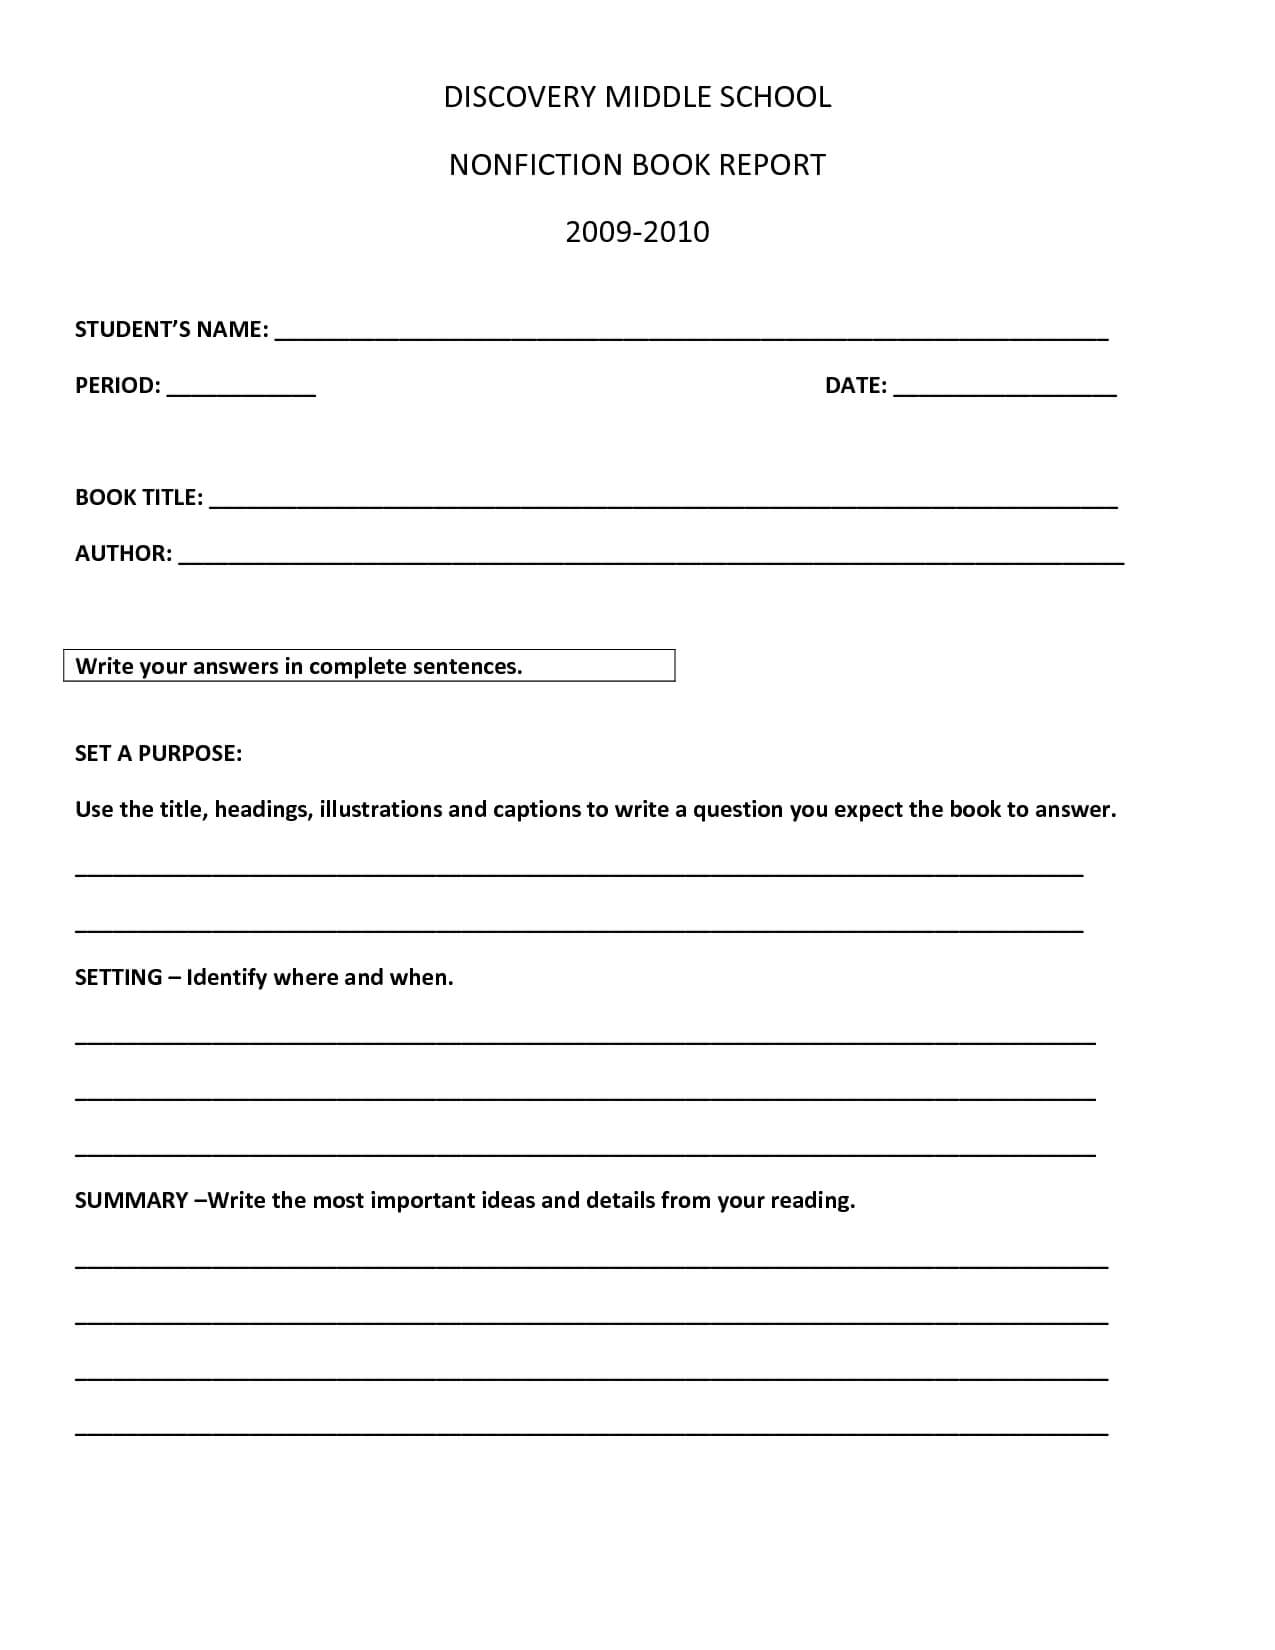 Book Report Template | Discovery Middle School Nonfiction Throughout Book Report Template Middle School